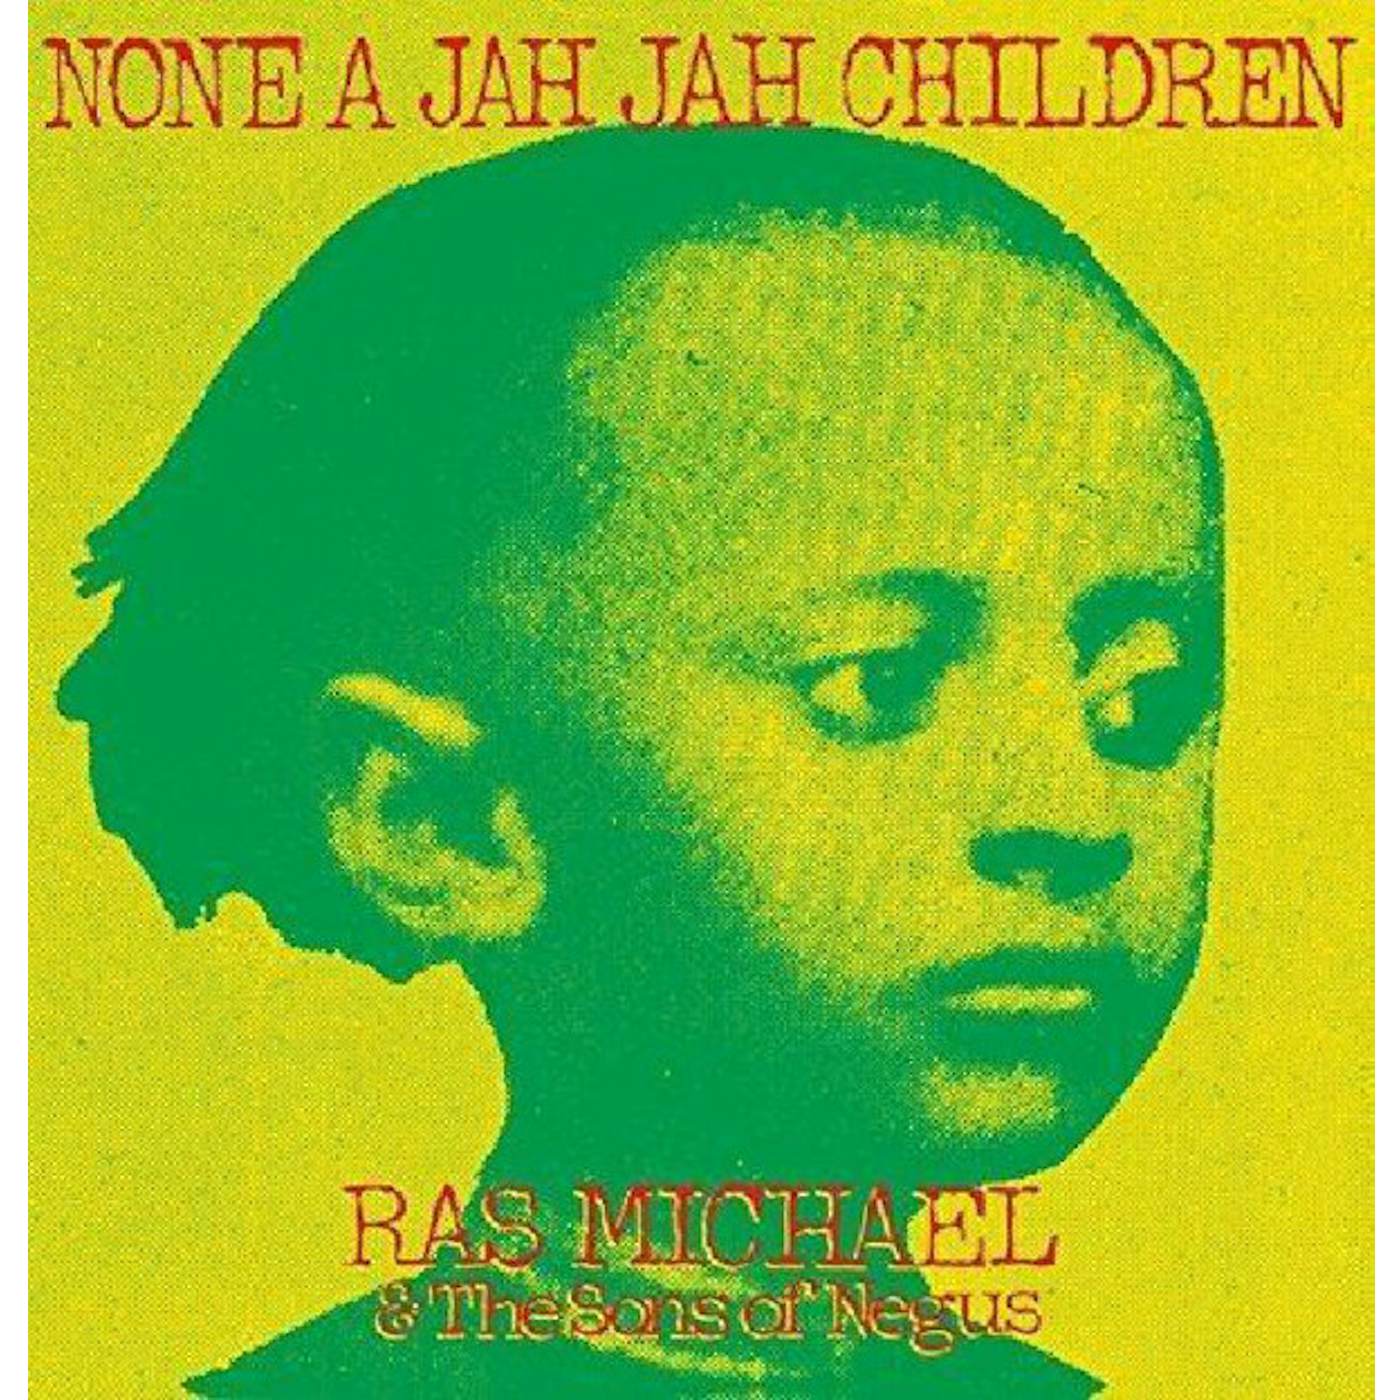 Ras Michael and The Sons Of Negus None A Jah Jah Children Vinyl Record